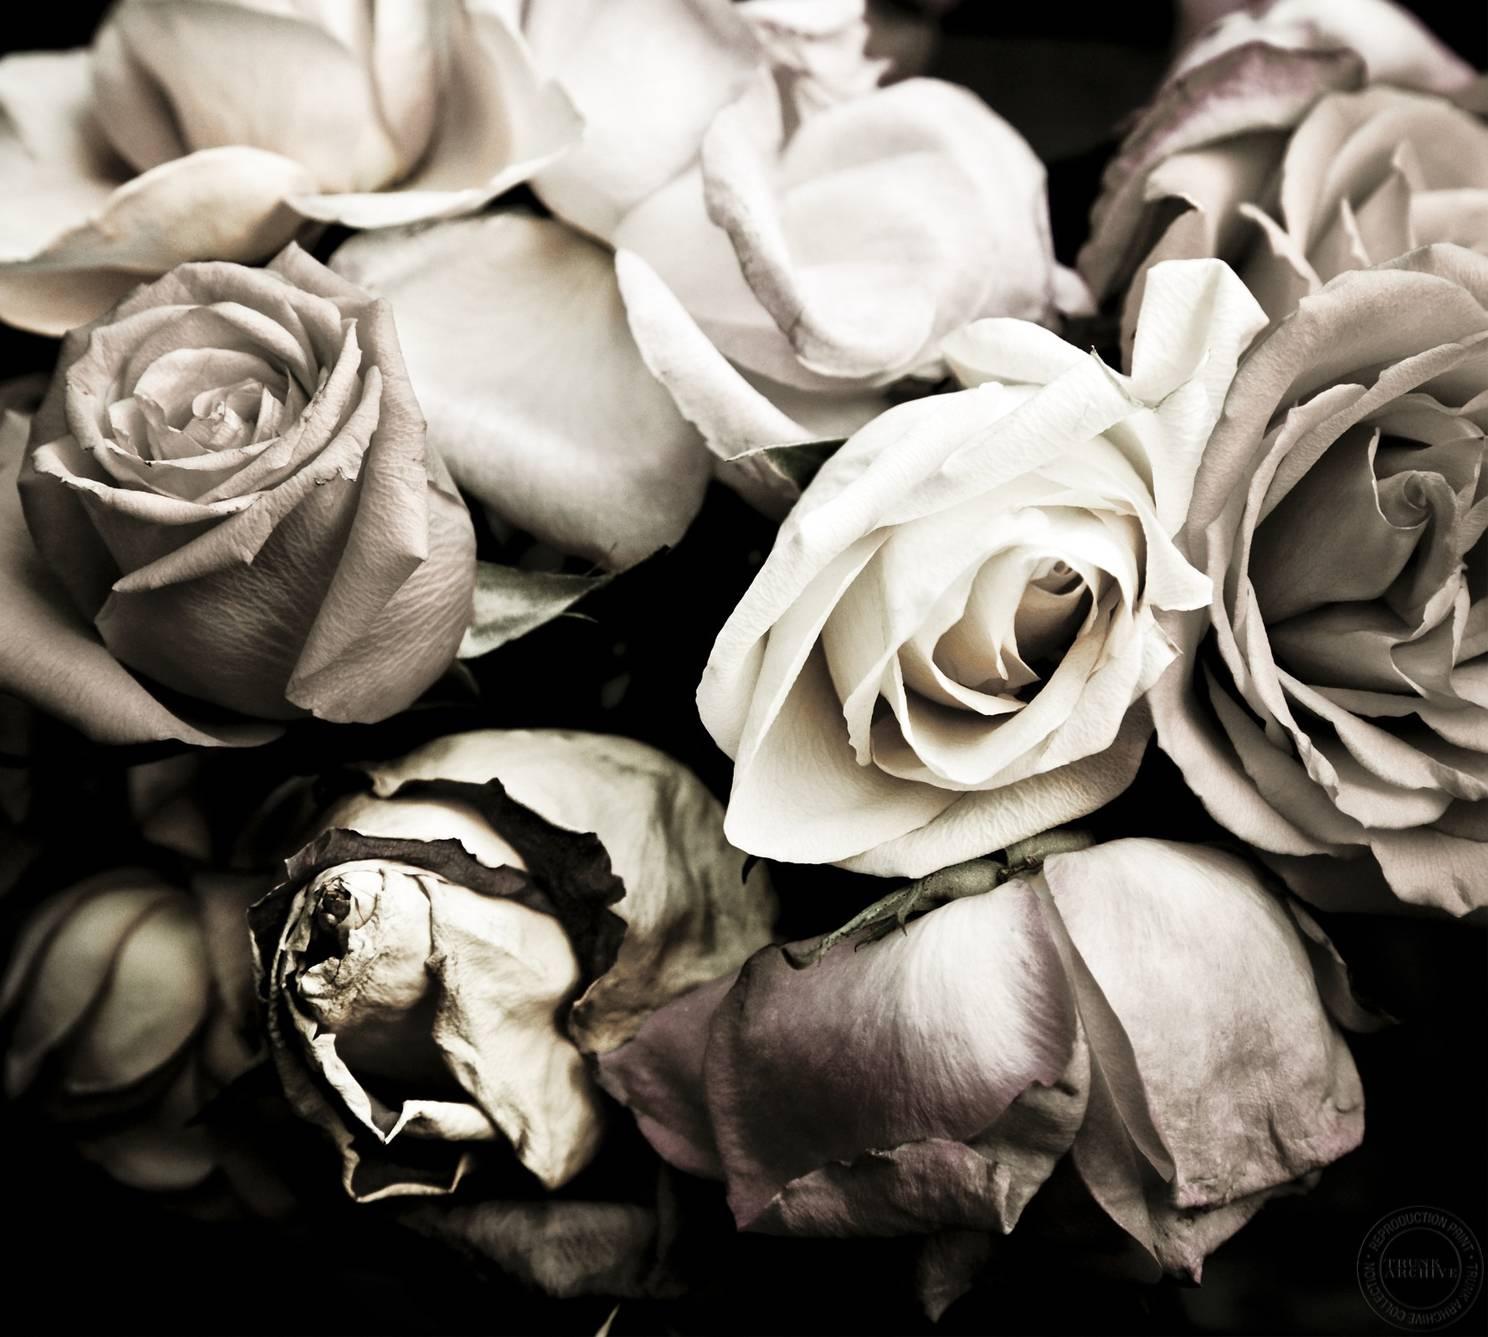 Patric Shaw Black and White Photograph - Still Life (Roses)